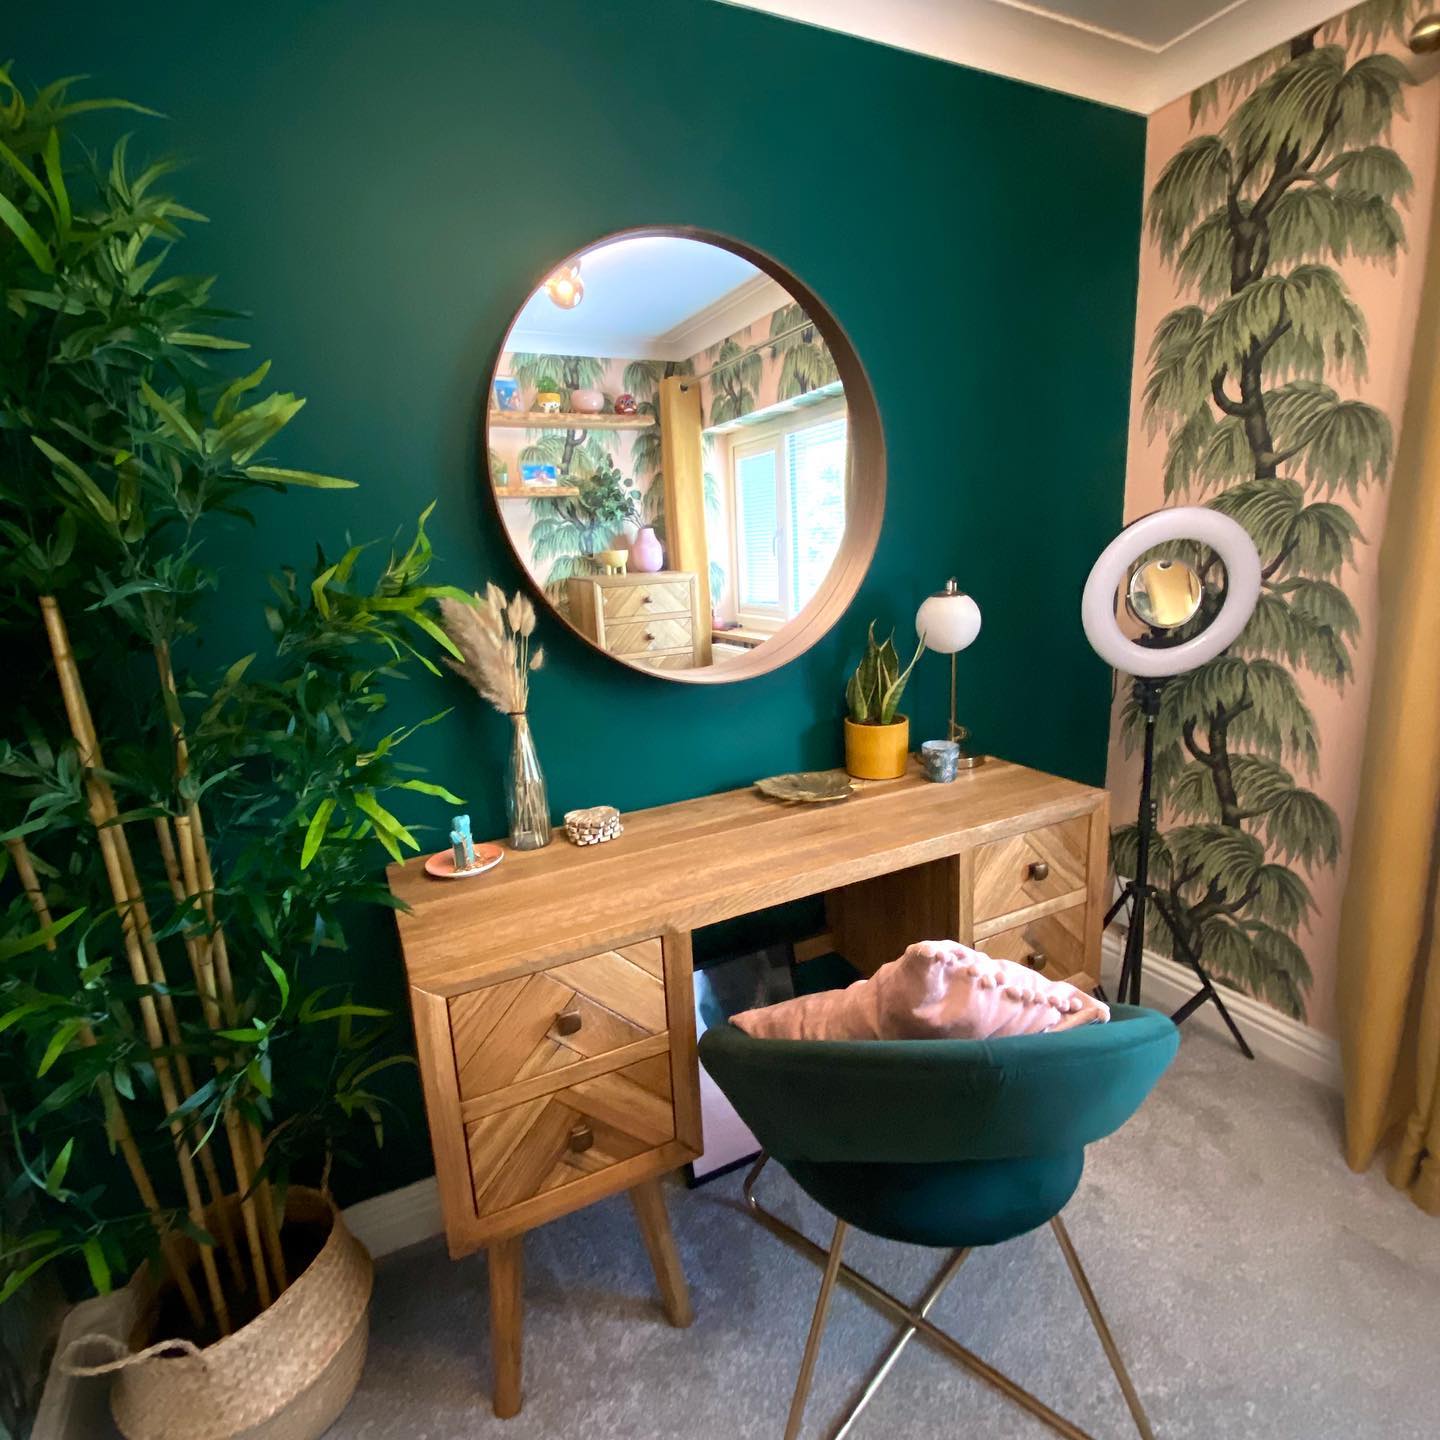 Parquet dressing table in a room with a bright green wall and botanical wallpaper.